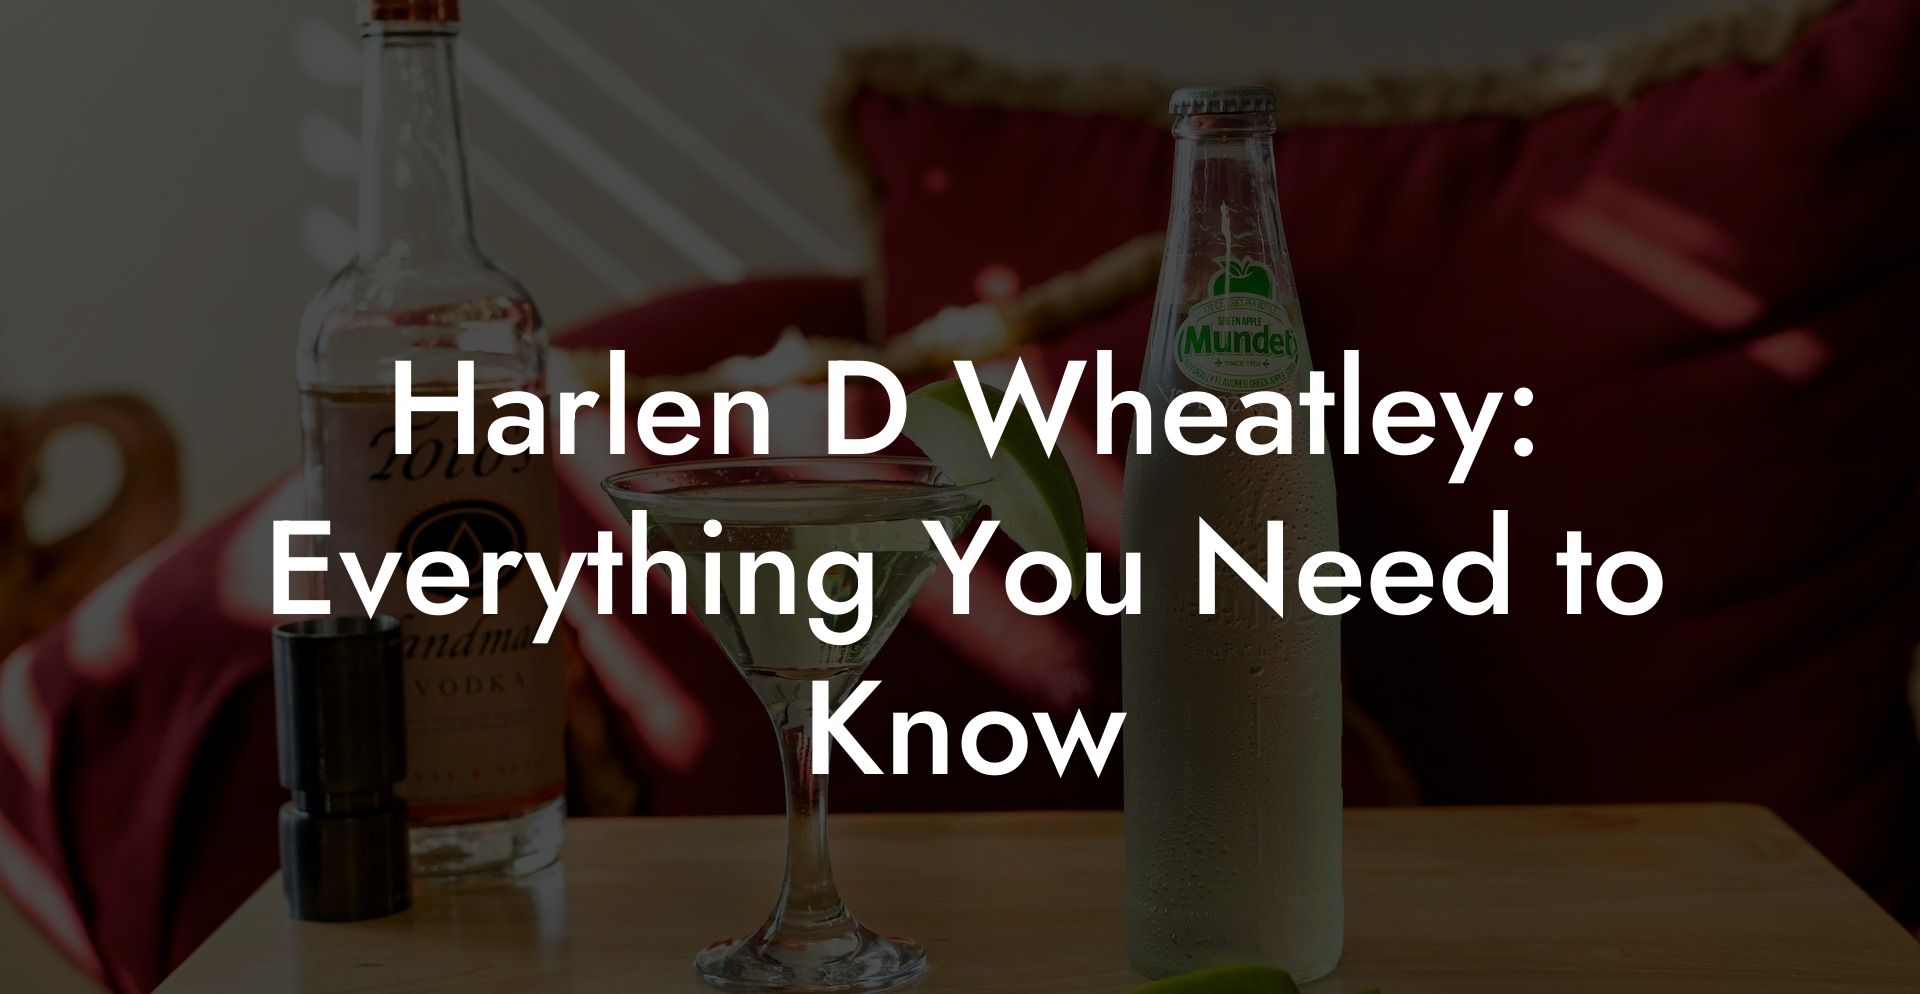 Harlen D Wheatley: Everything You Need to Know